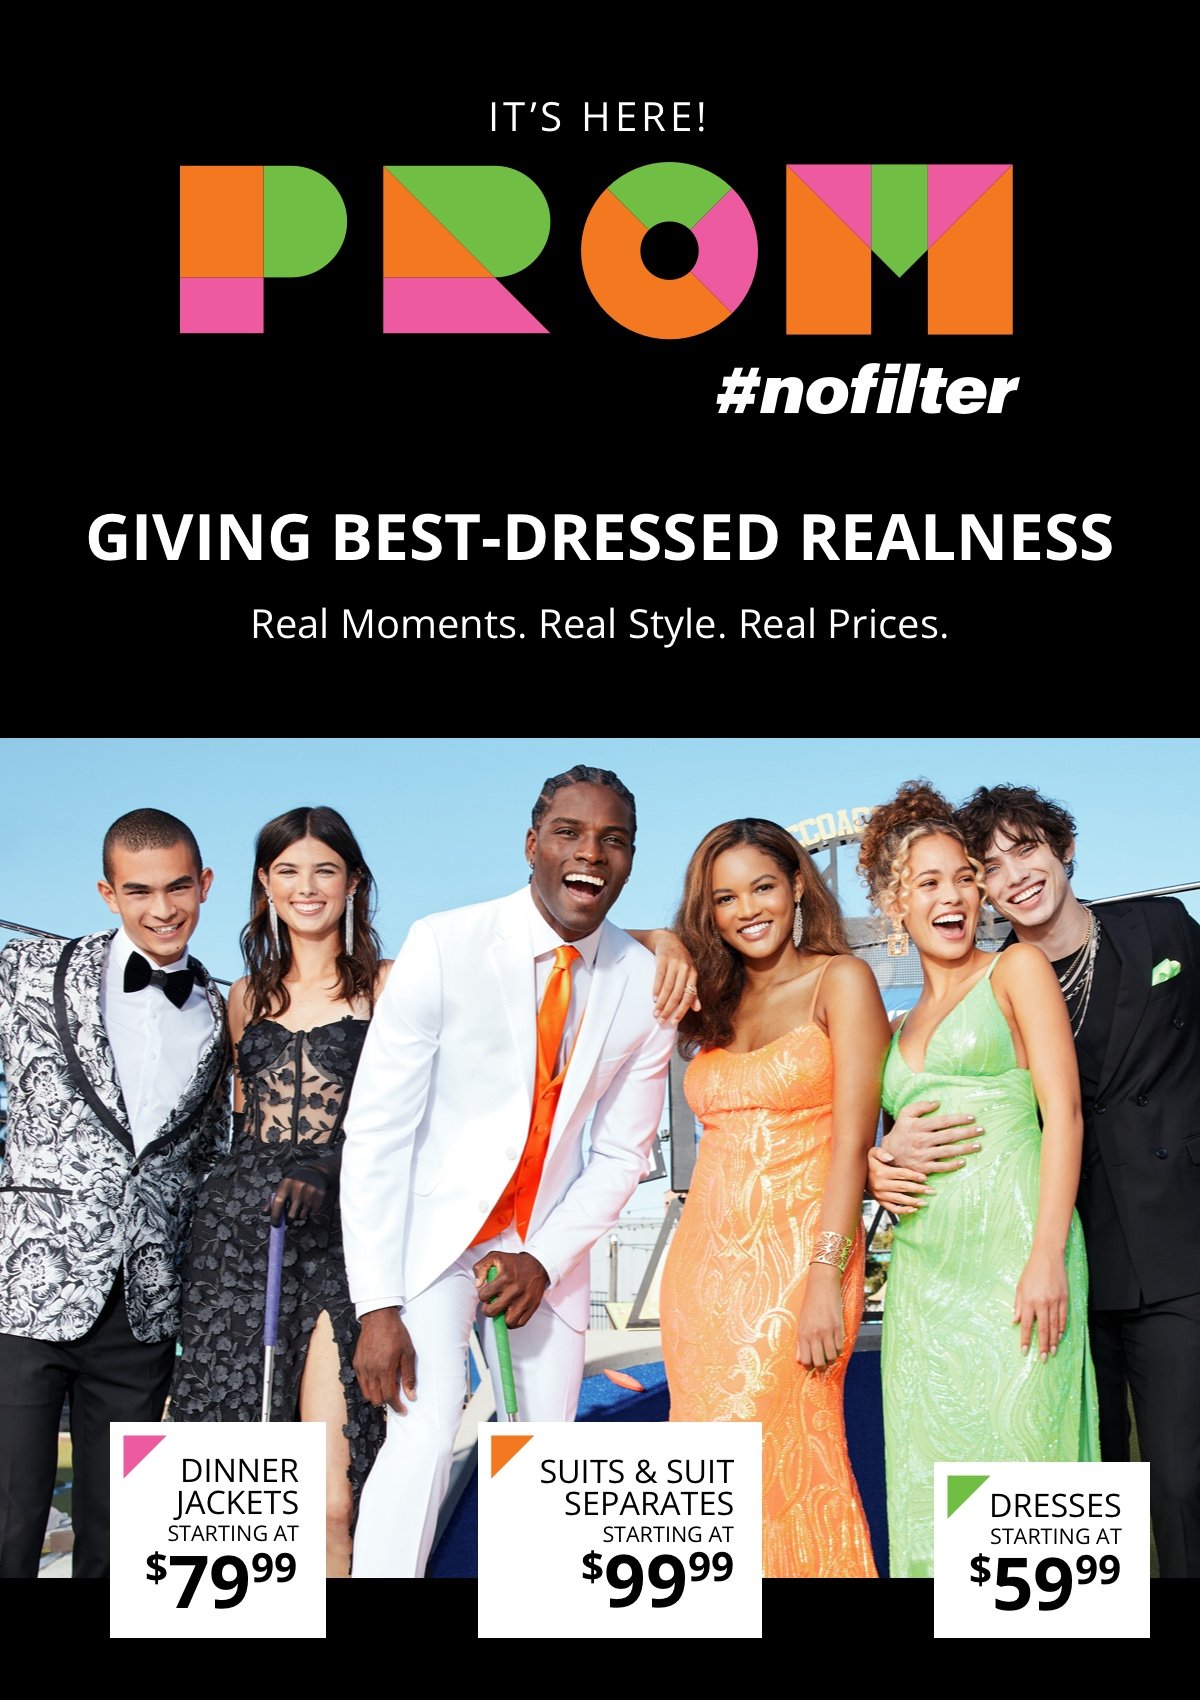 It’s Here!|Prom: #nofilter|Giving best-dressed realness|Real Moments. Real Style. Real Prices.|Dinner Jackets |Starting at \\$79.99|Suits and Suit Separates|Starting at \\$99.99|Dresses| Starting at \\$59.99